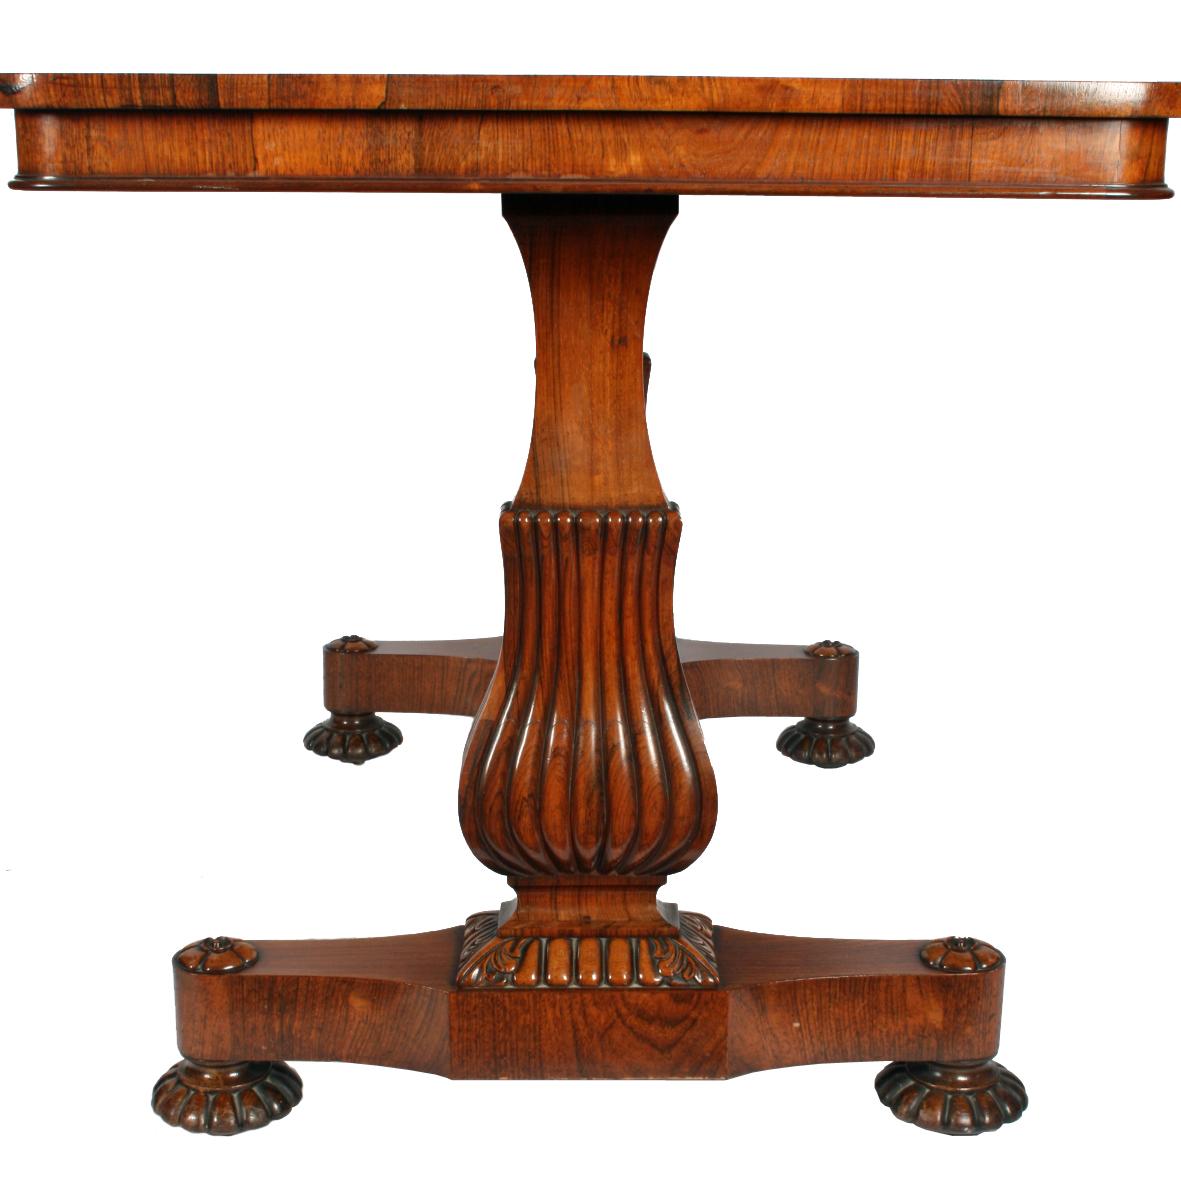 An early 19th century George IV rosewood veneered library table with a twin support base.

The table has a pair of fabulous supports at each end comprising a platform lifted on carved rosewood bun feet with concealed casters.

The two platforms